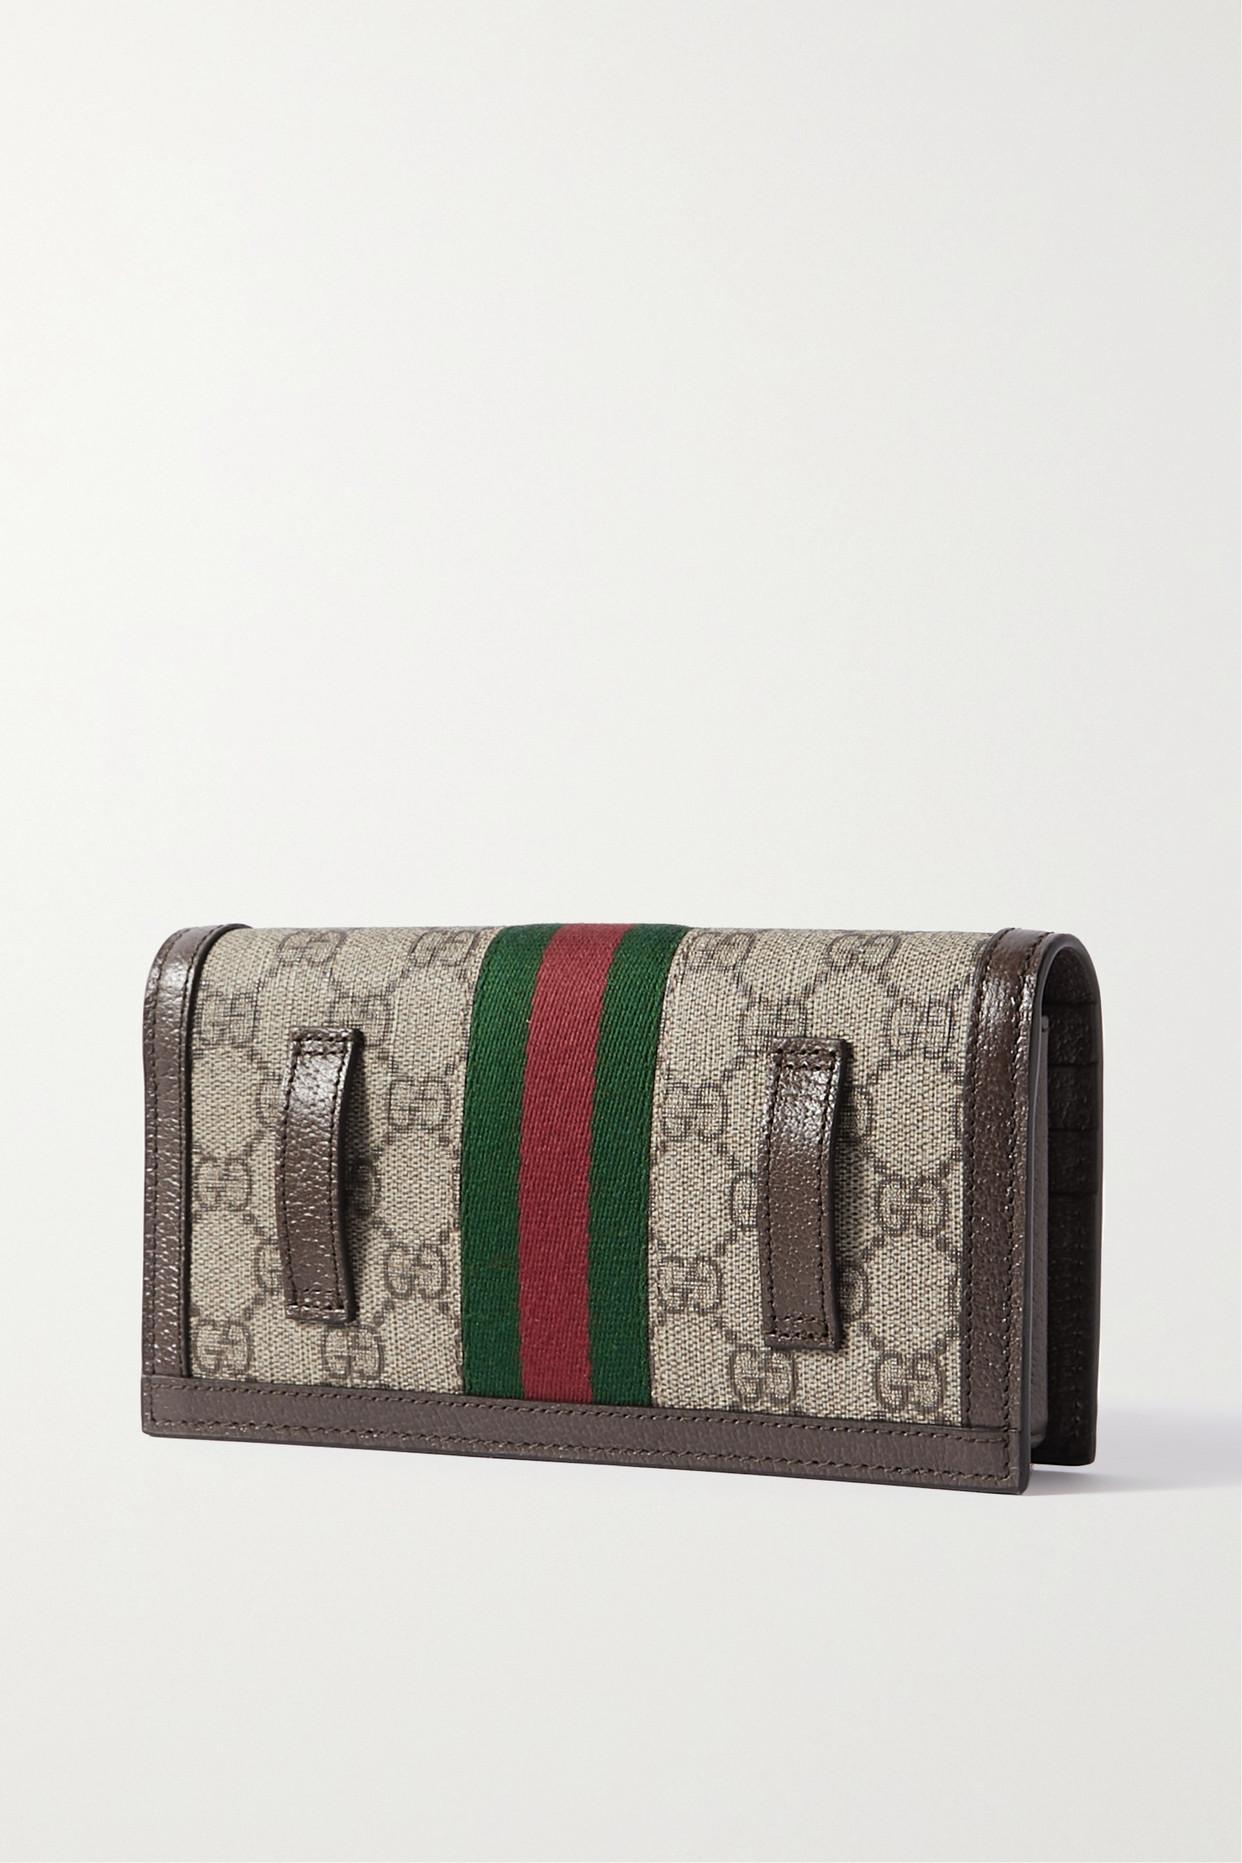 Gucci Ophidia Textured Leather-trimmed Printed Coated-canvas Wallet in  Brown